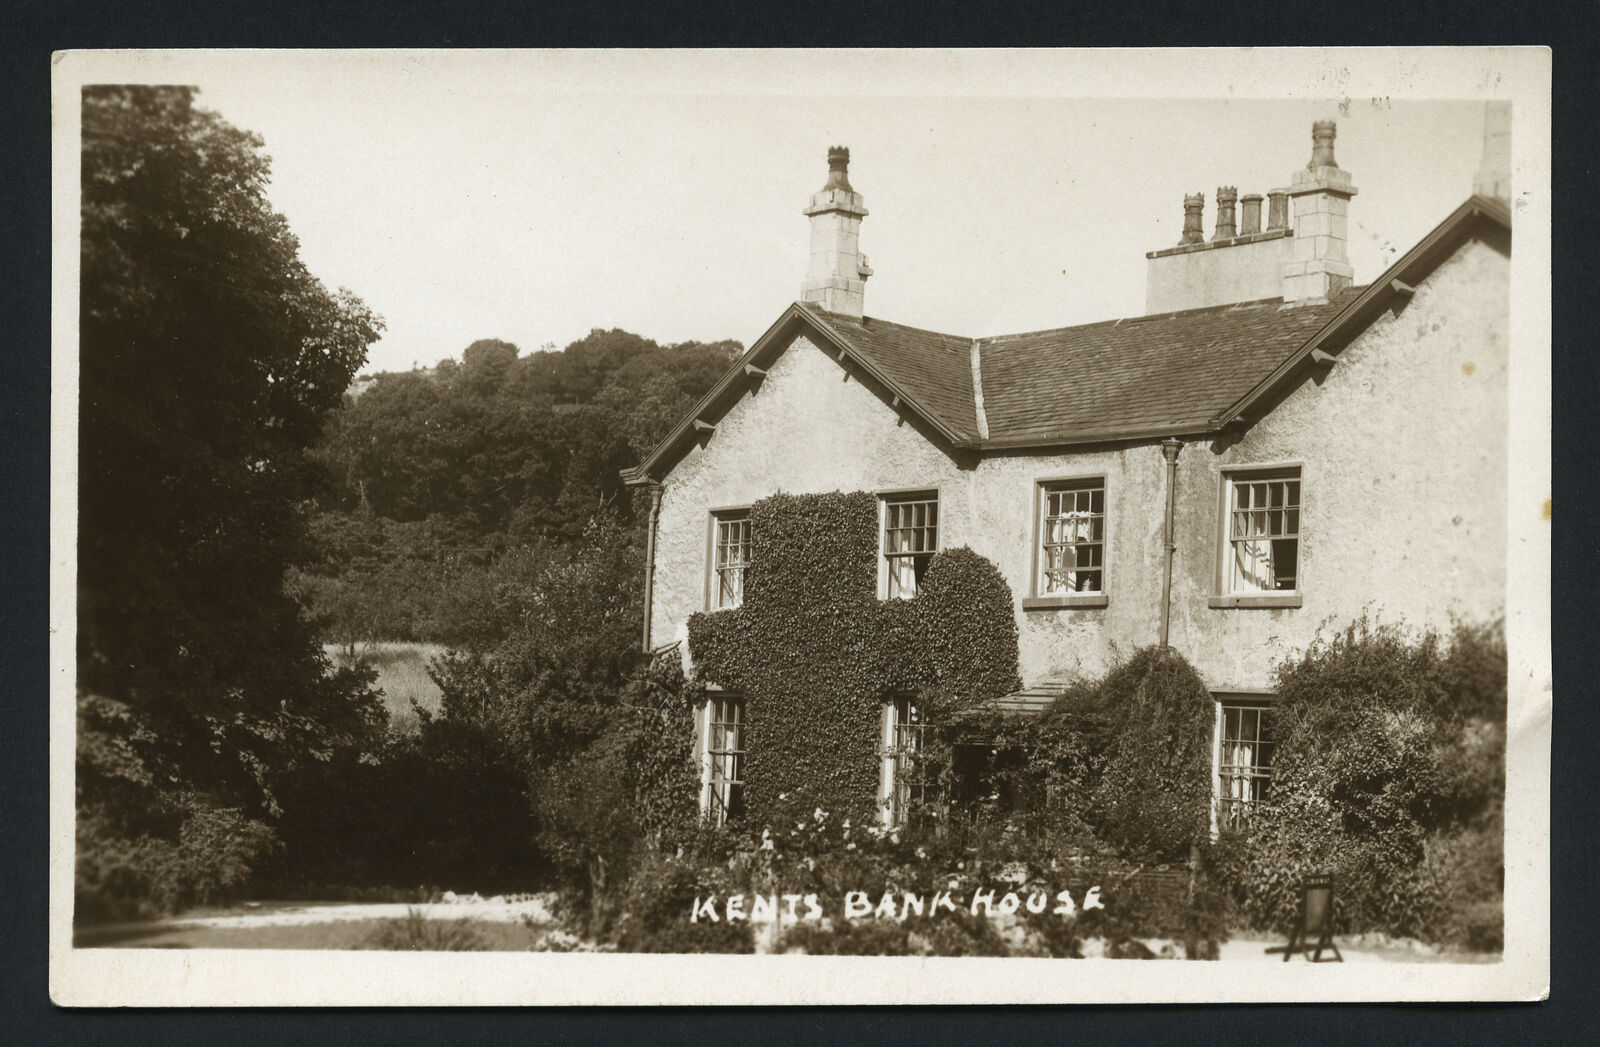 House Clearance - KENTS BANK HOUSE - Cumbria A. & L Slingsby GRANGE OVER SANDS Service LANCASHIRE